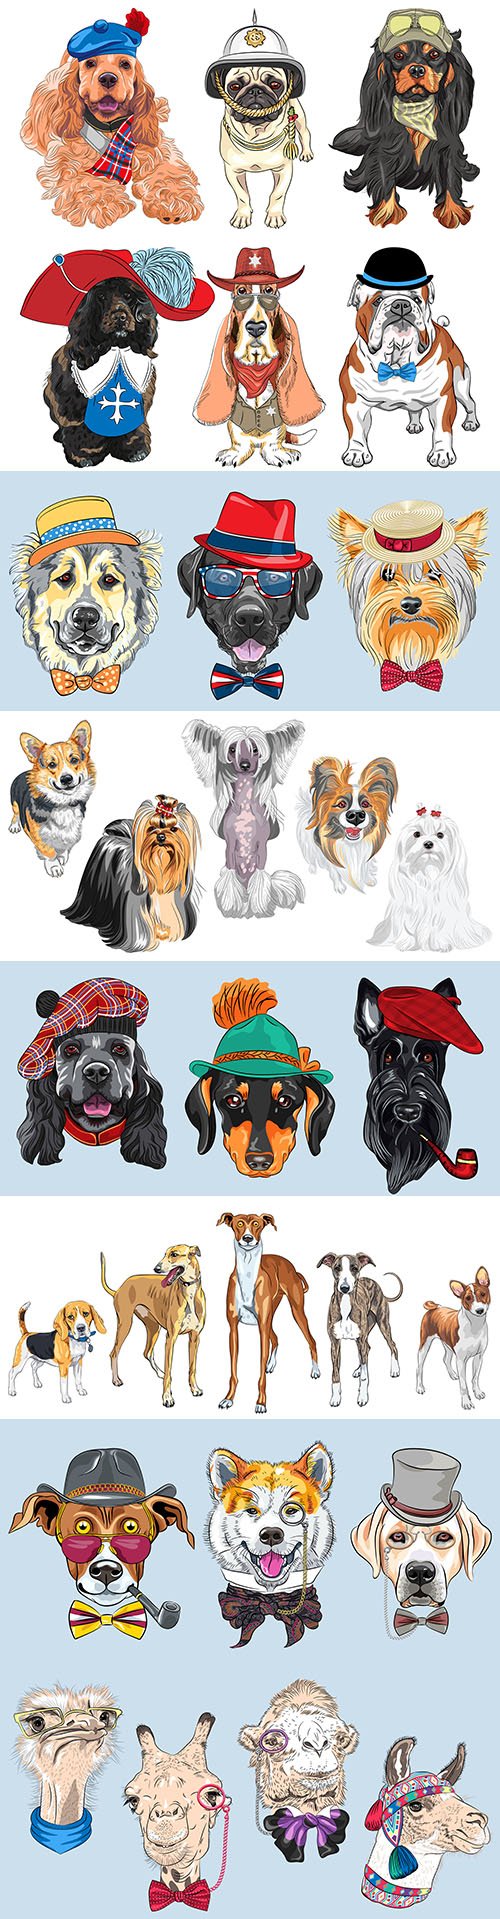 Dogs of different breeds and cartoon hipster hats